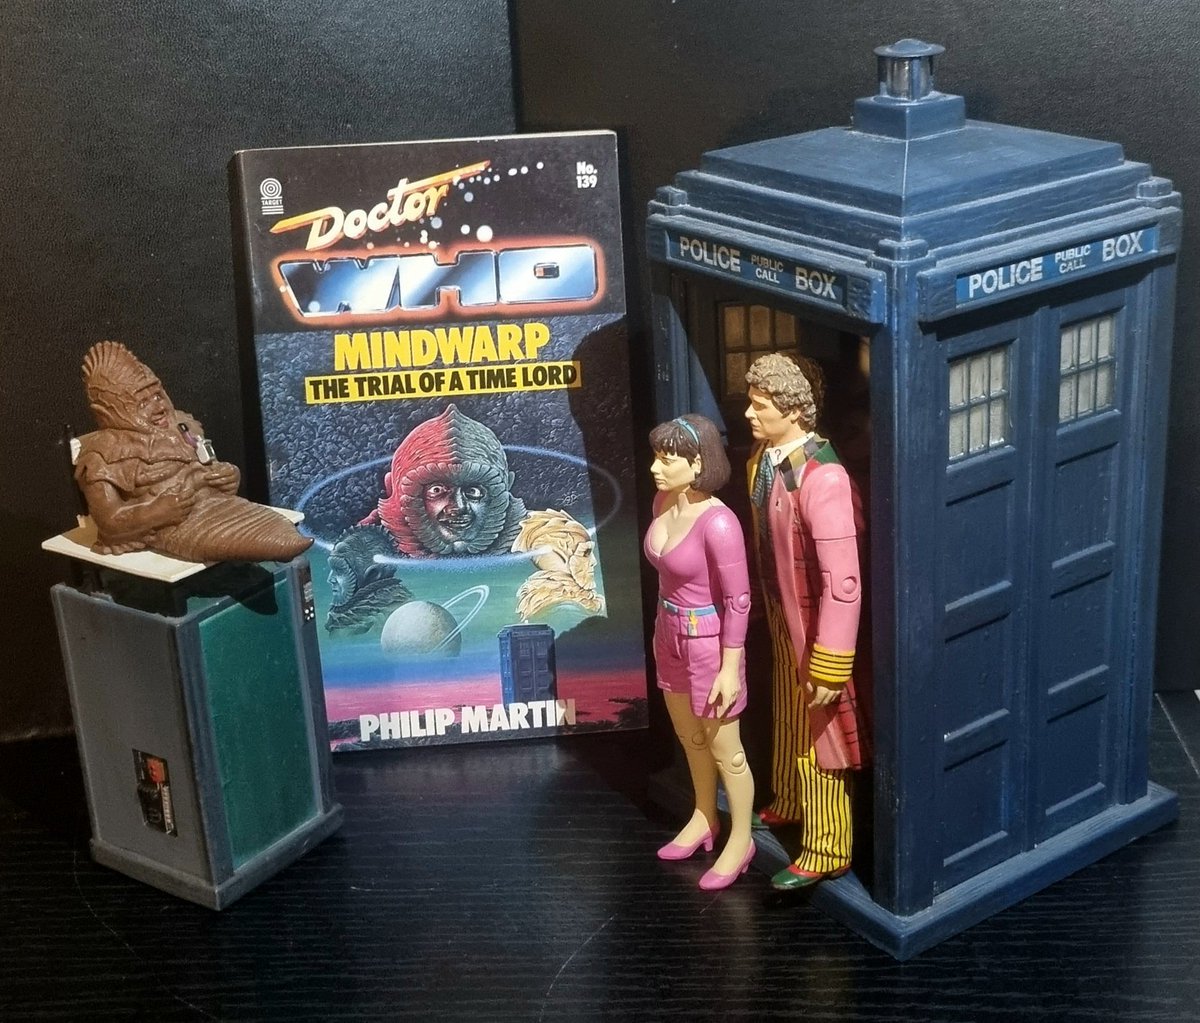 I'm still not so keen on Mindwarp. It's the way the Doctor treats Peri. It's never been confirmed. I don't think if that was the Valeyard or the Doctor #DoctorWho